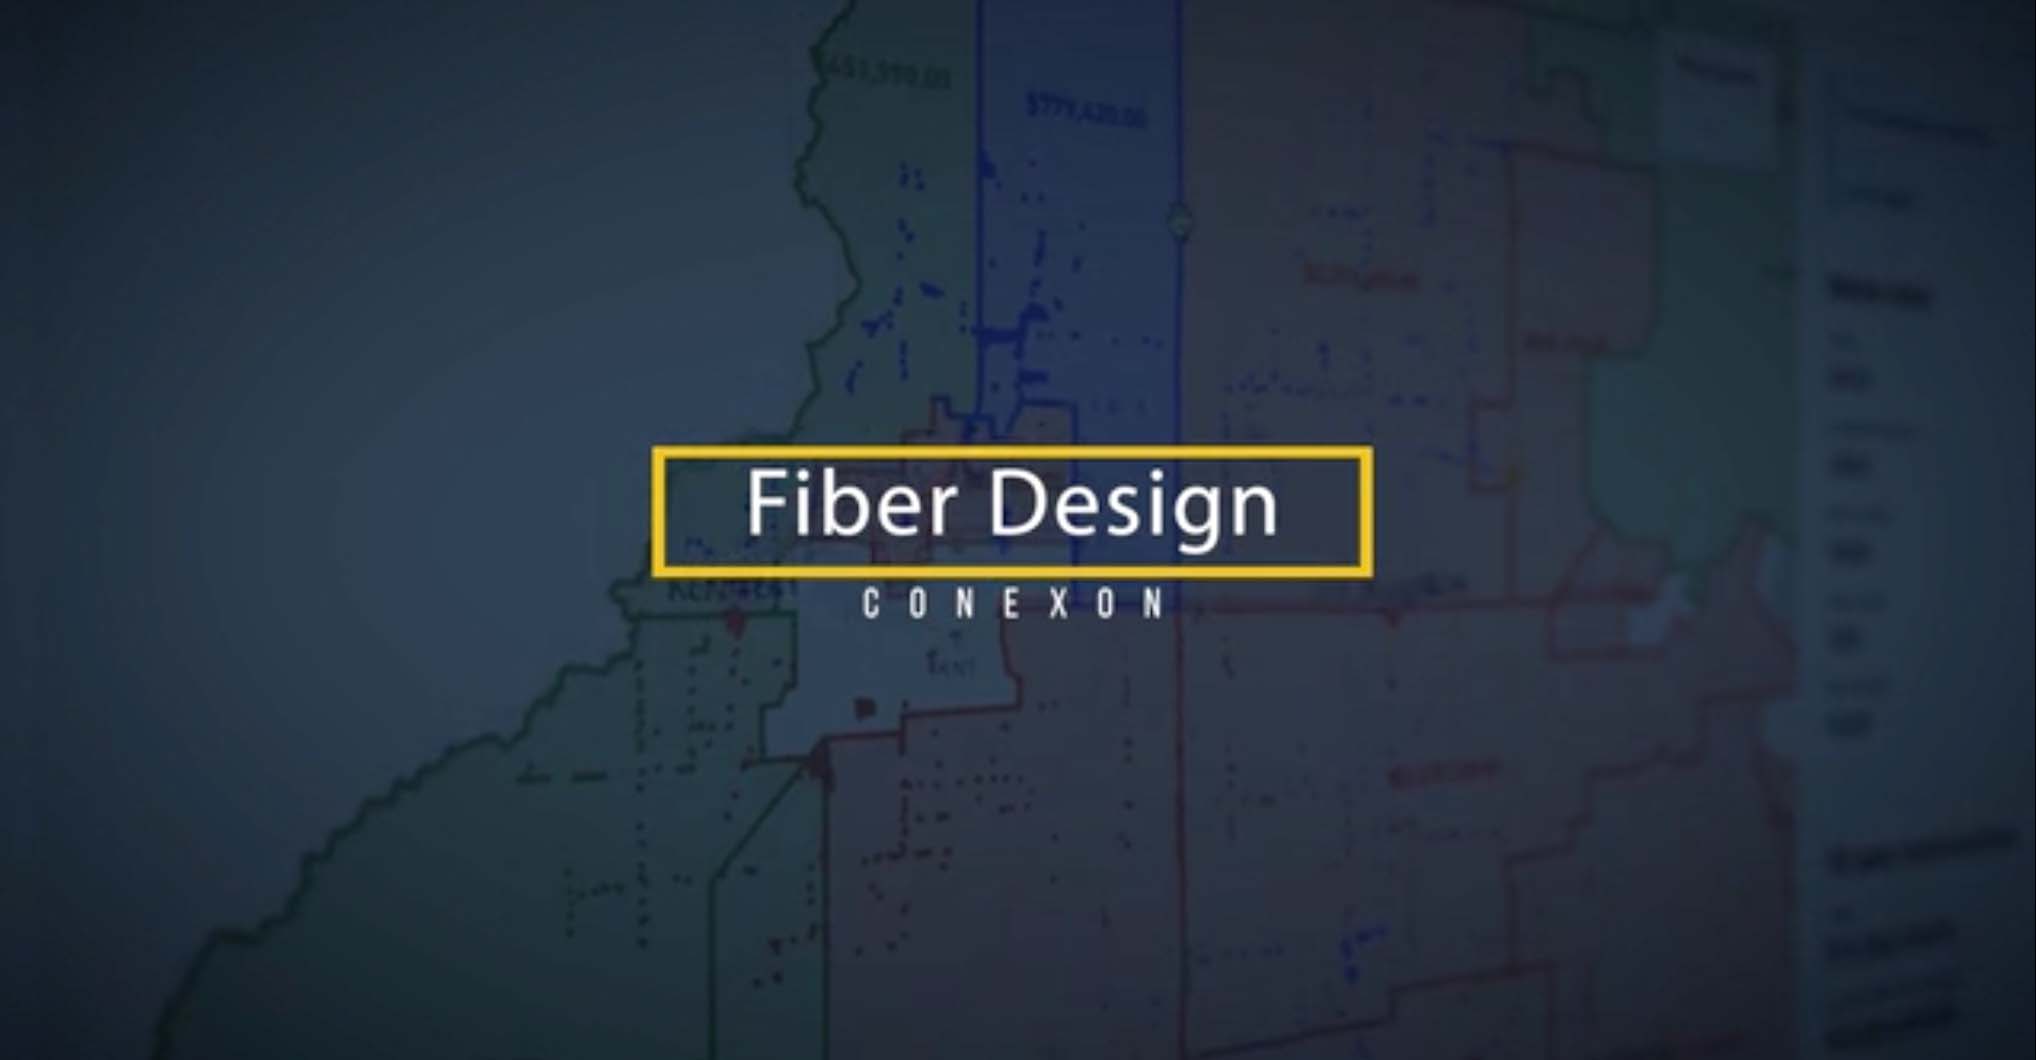 A Conexon designed fiber map with a blue overlay overtop of picture with text that says, "Fiber design"